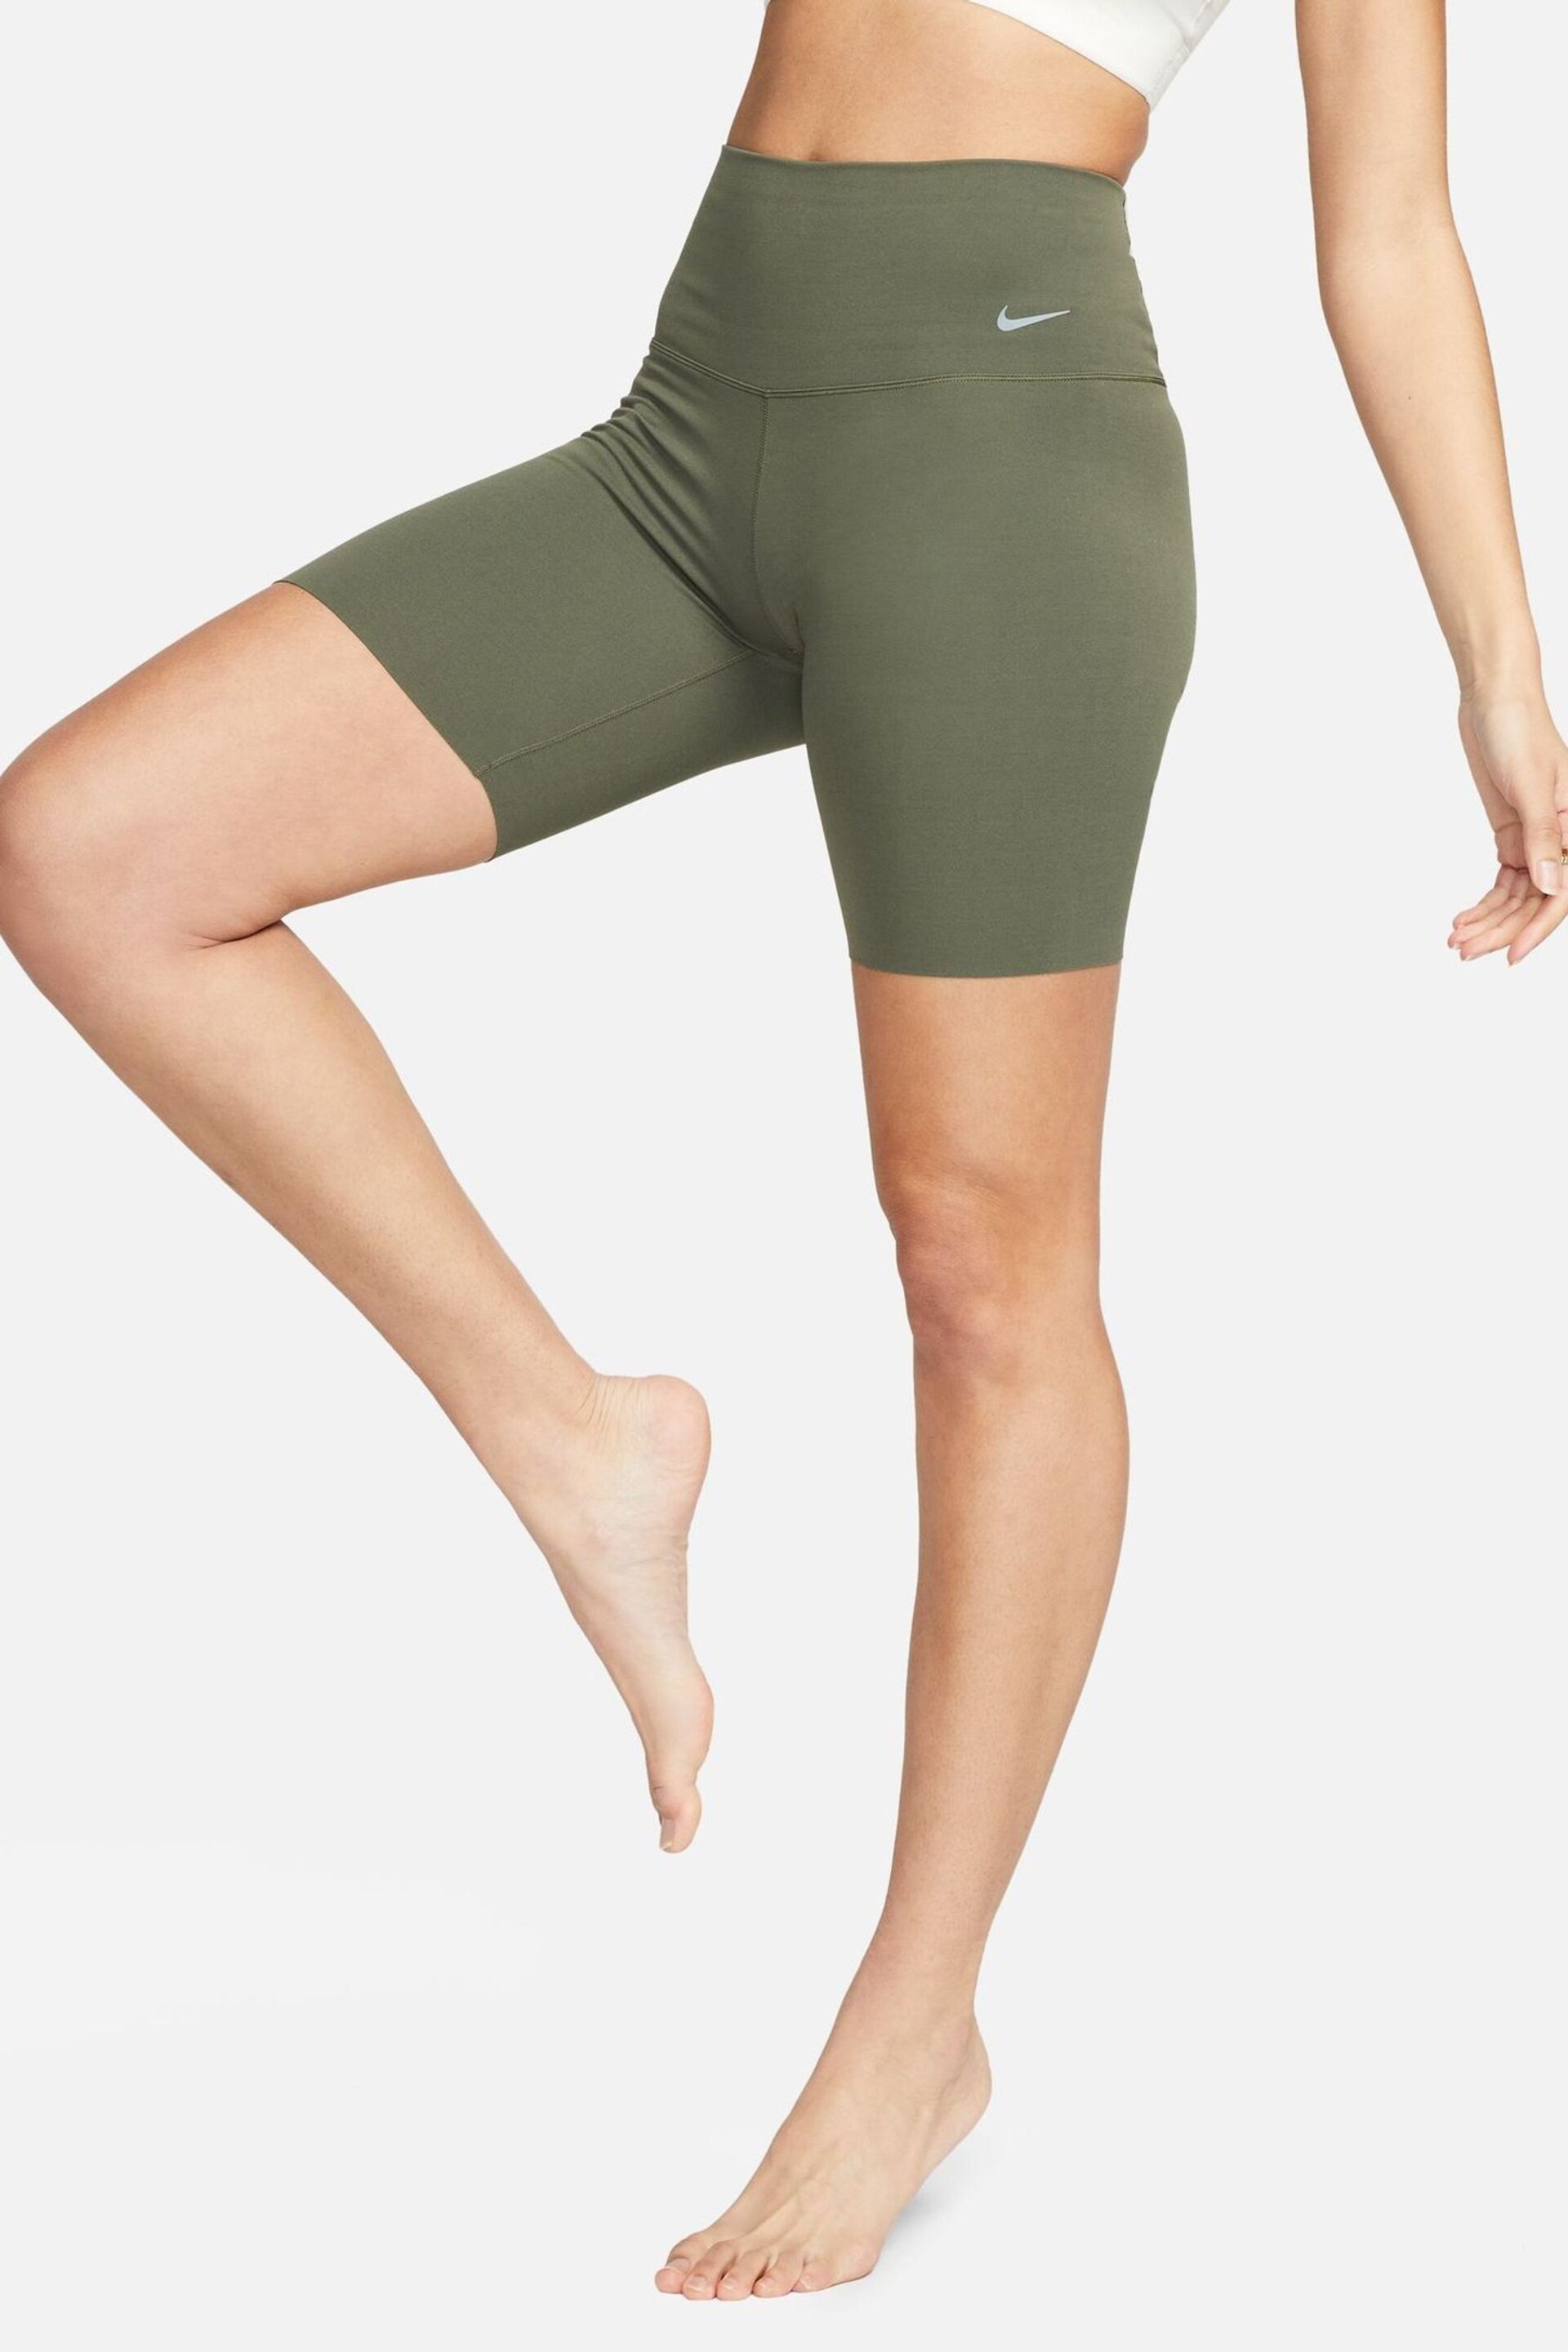 Nike Green Zenvy Gentle Support High Waisted 8 Cycling Shorts - Image 4 of 8